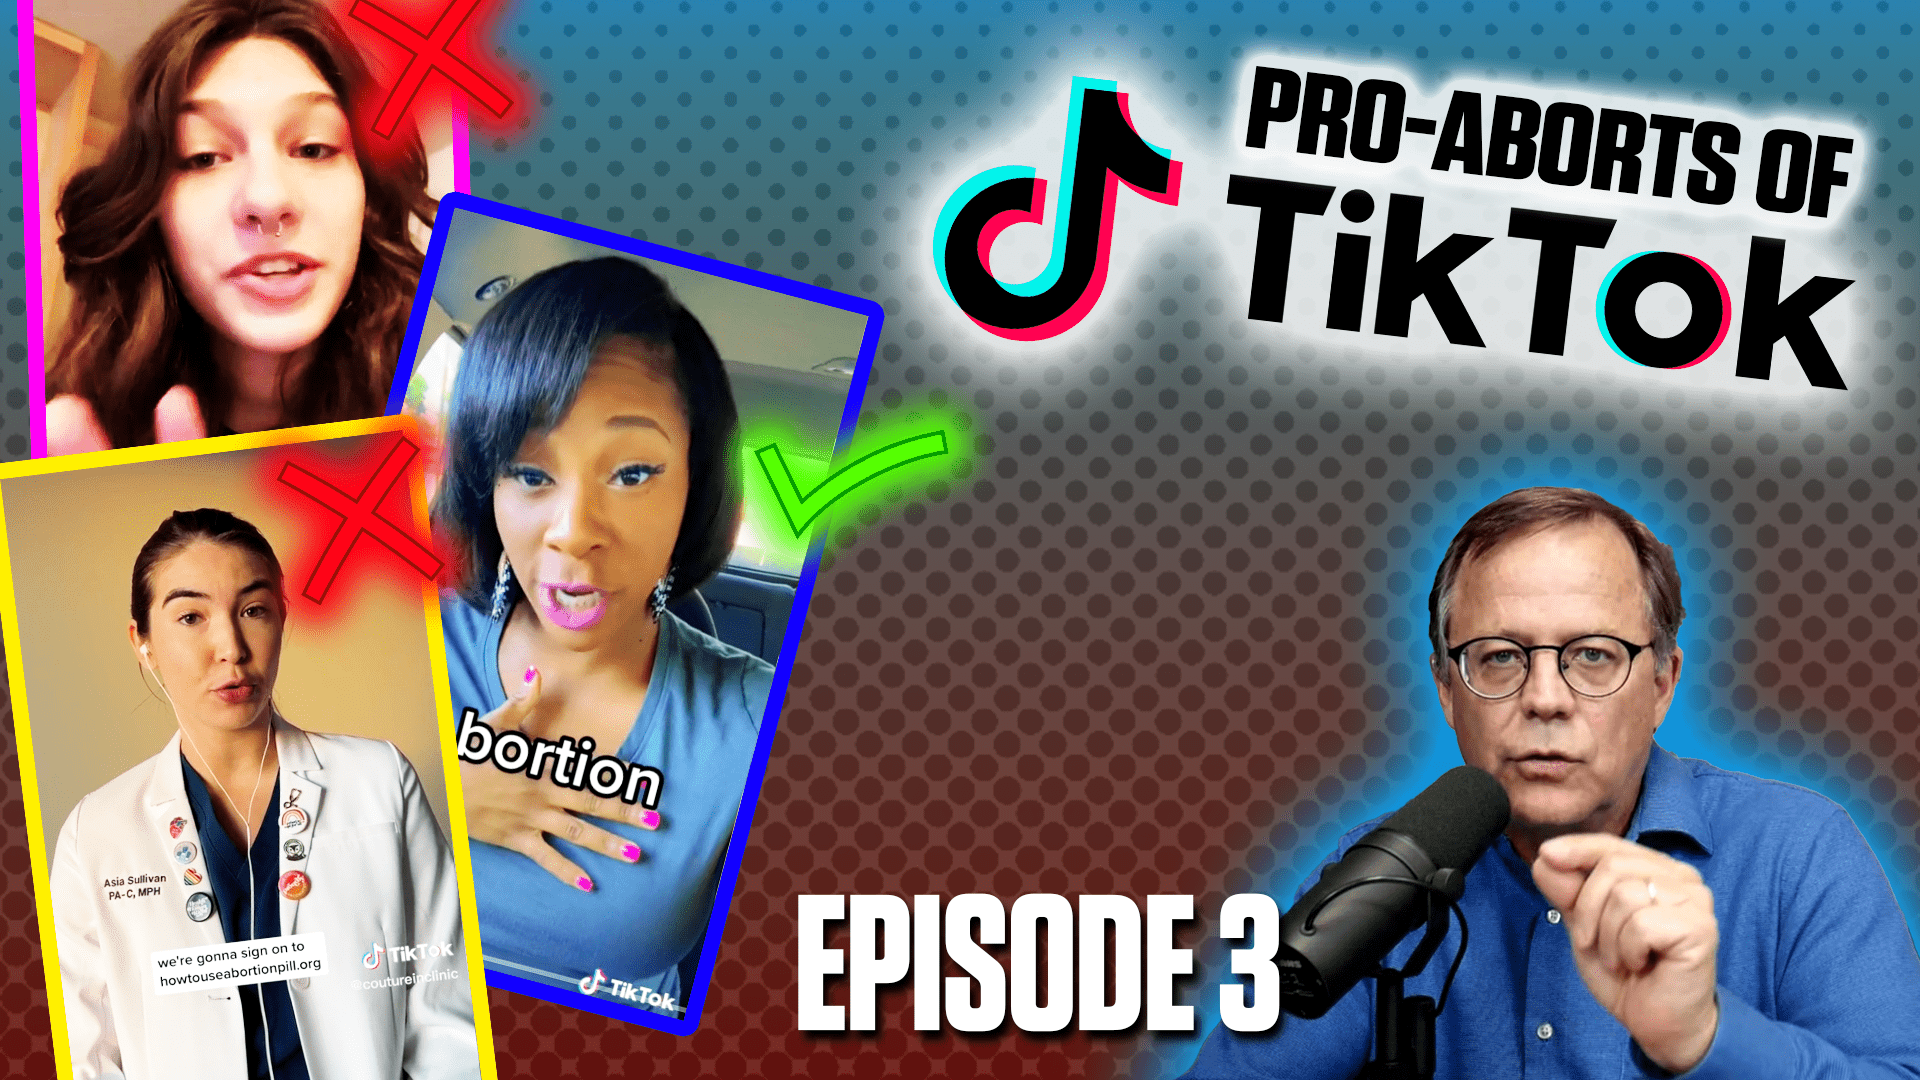 The Bathroom is Now the Abortion Clinic | Pro-Aborts of Tiktok Ep. 3